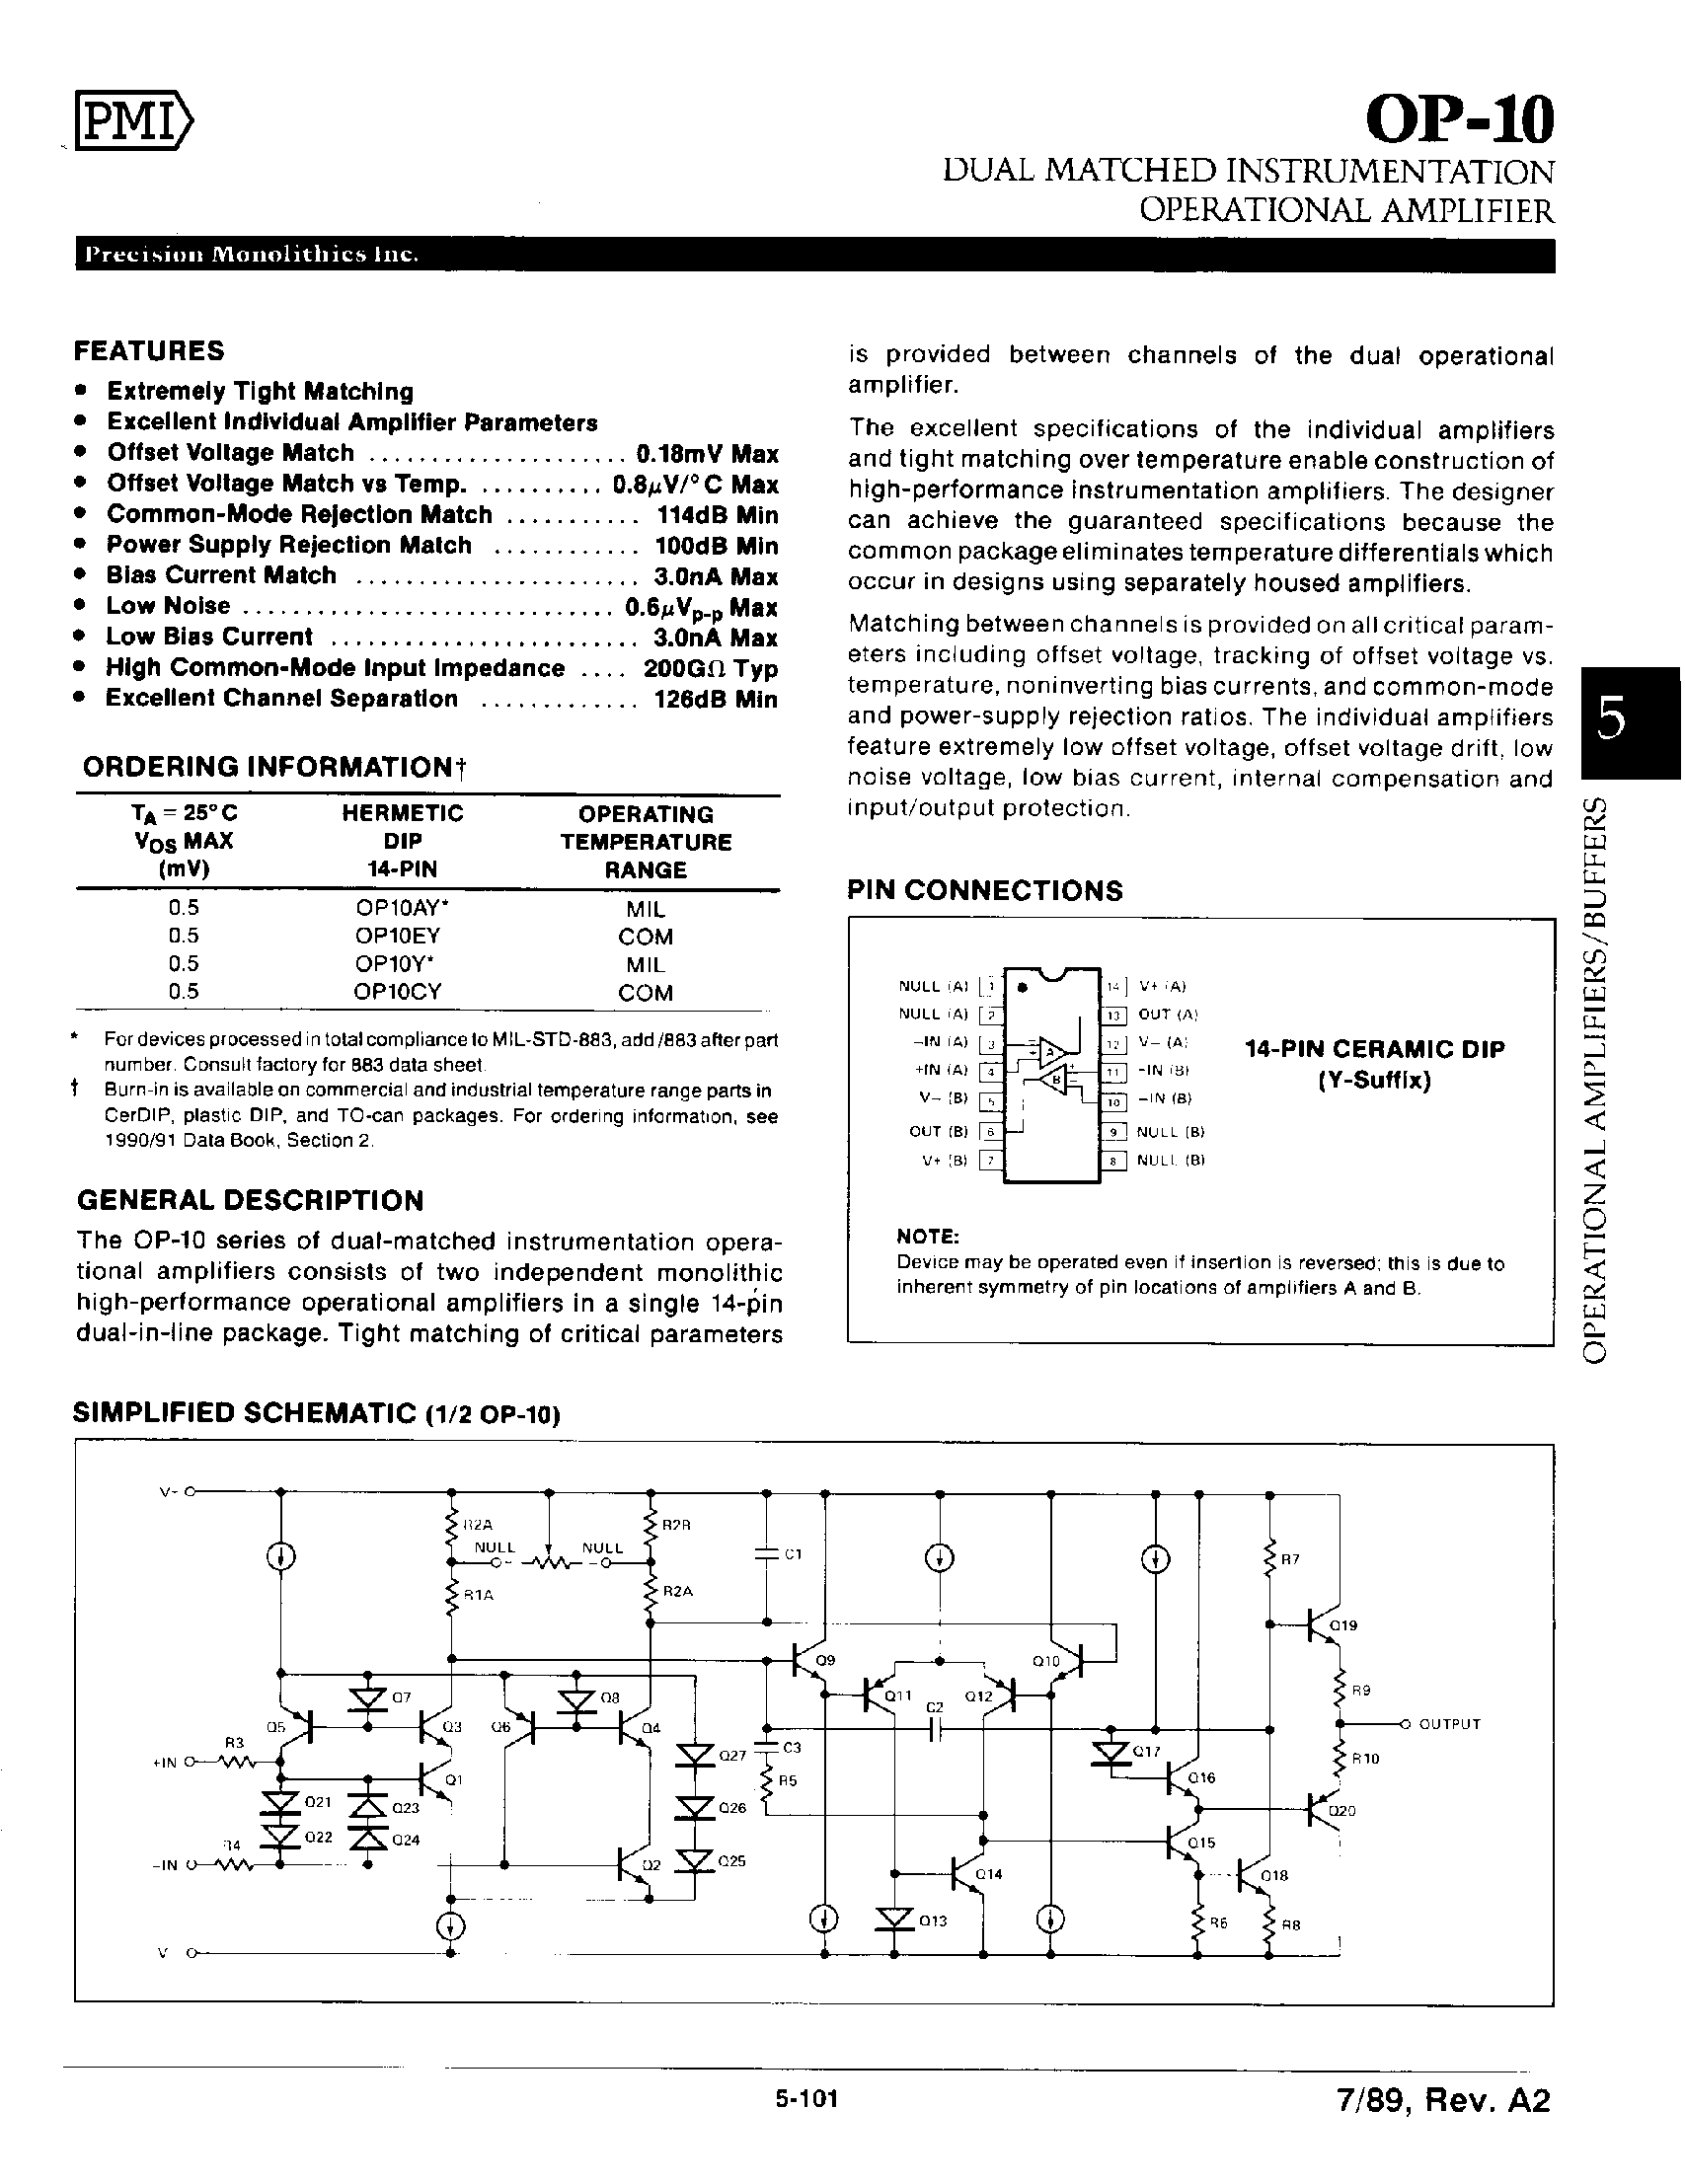 Datasheet OP10 - Dual Matched Instrumentation Operational Amplifier page 1